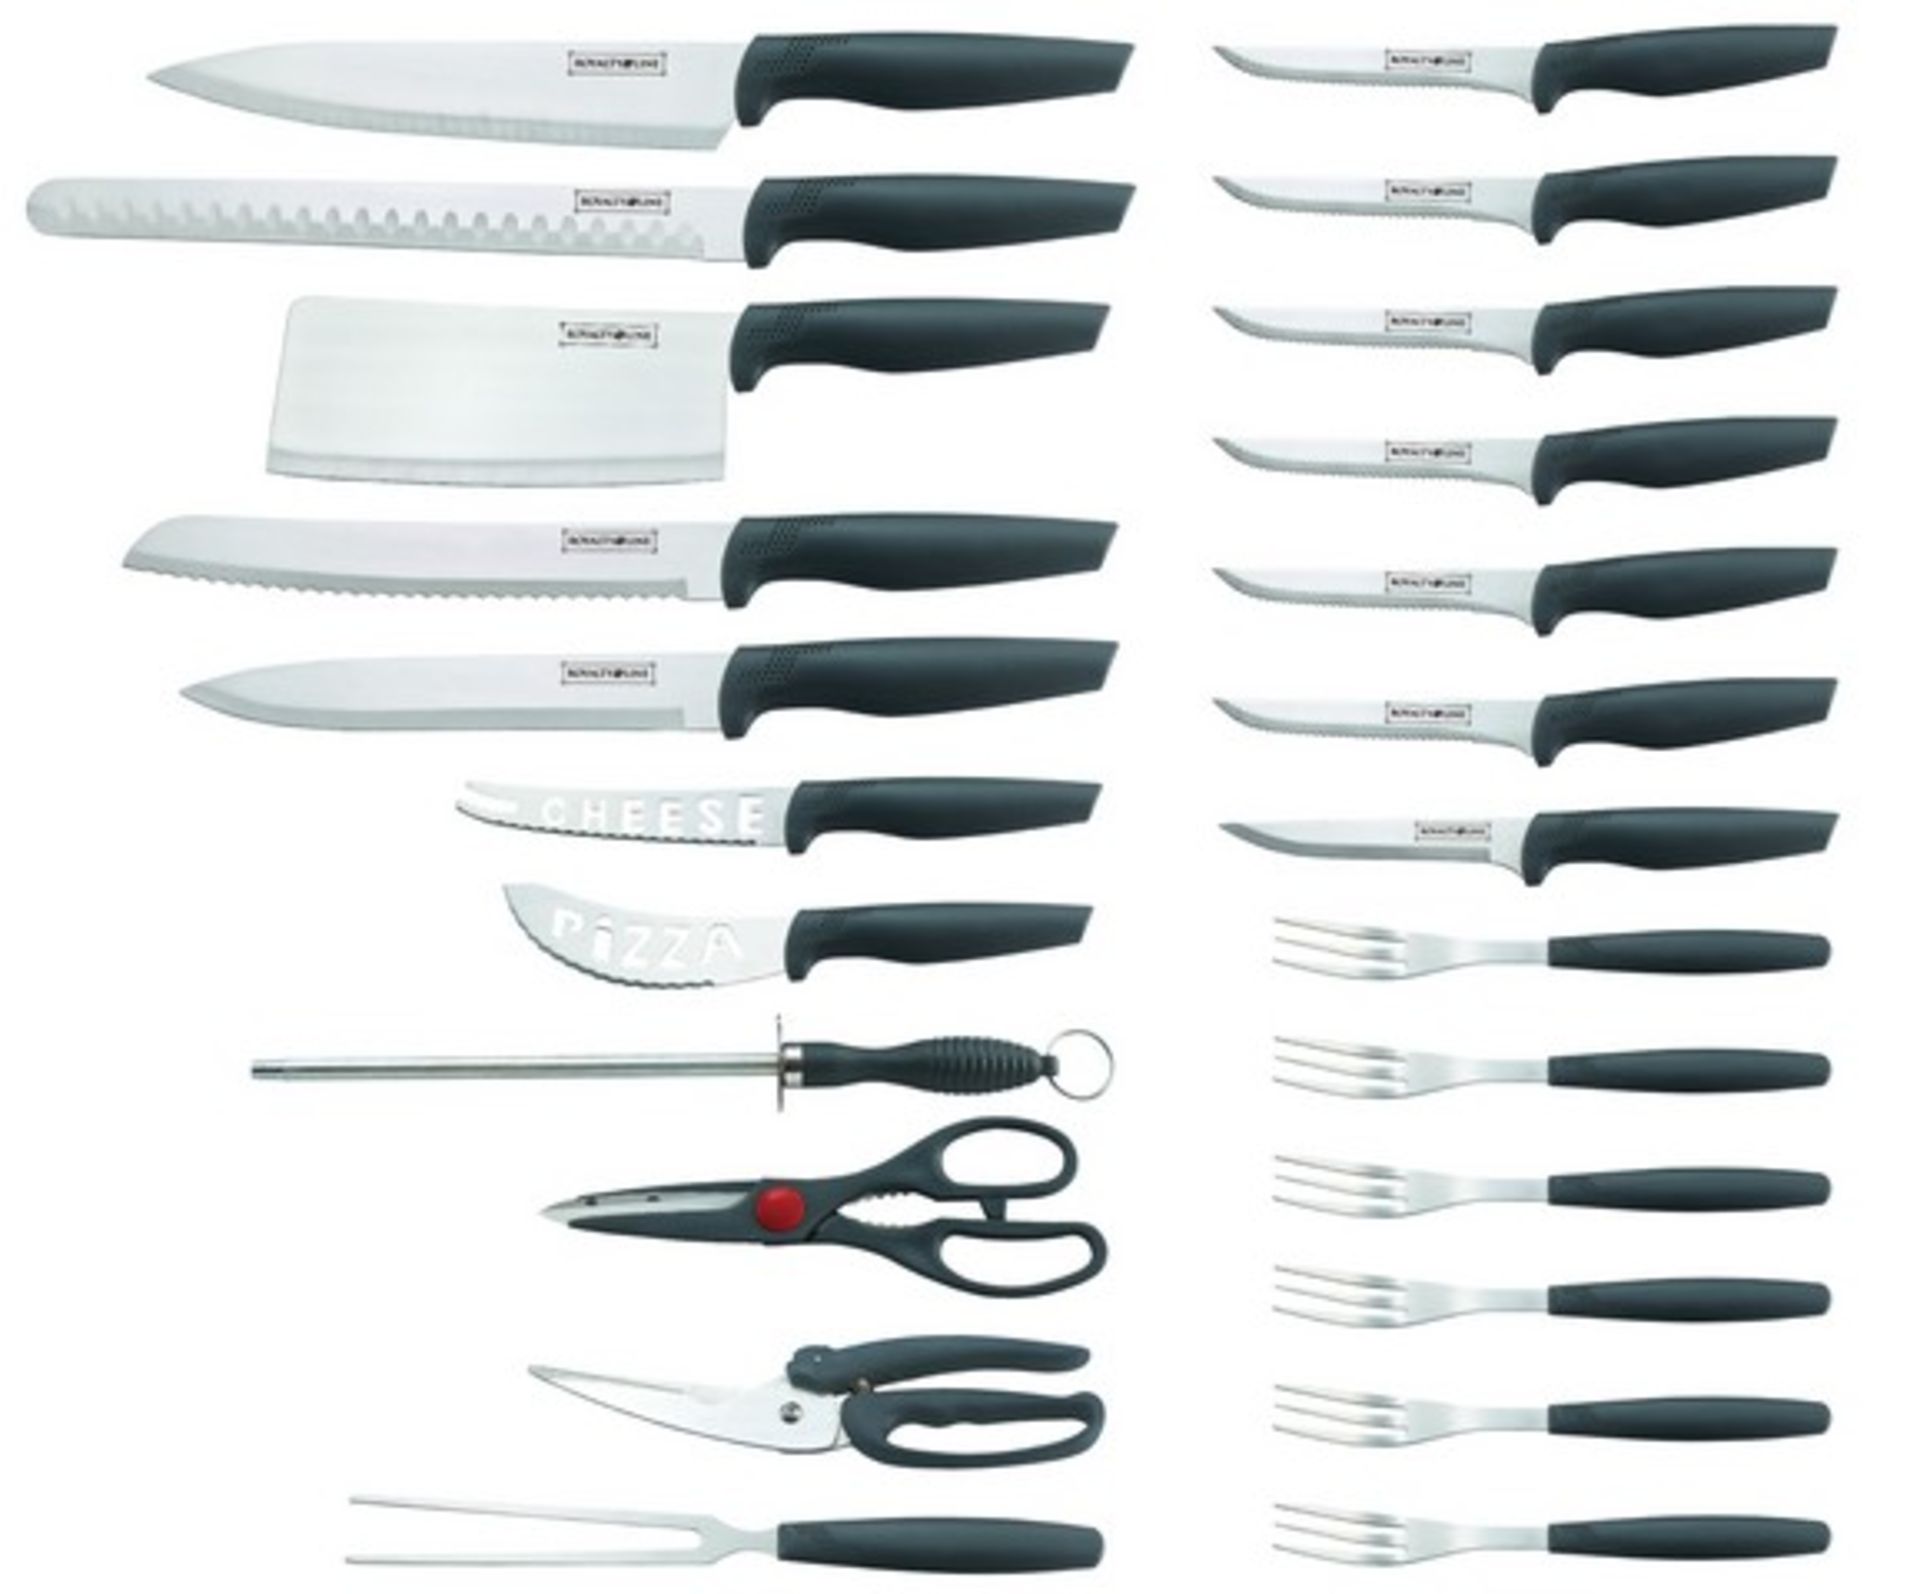 V Brand New 24 Piece Stainless Steel Knife Set-Includes 6 x Forks and 6 x Steak Knives-1 x Pizza